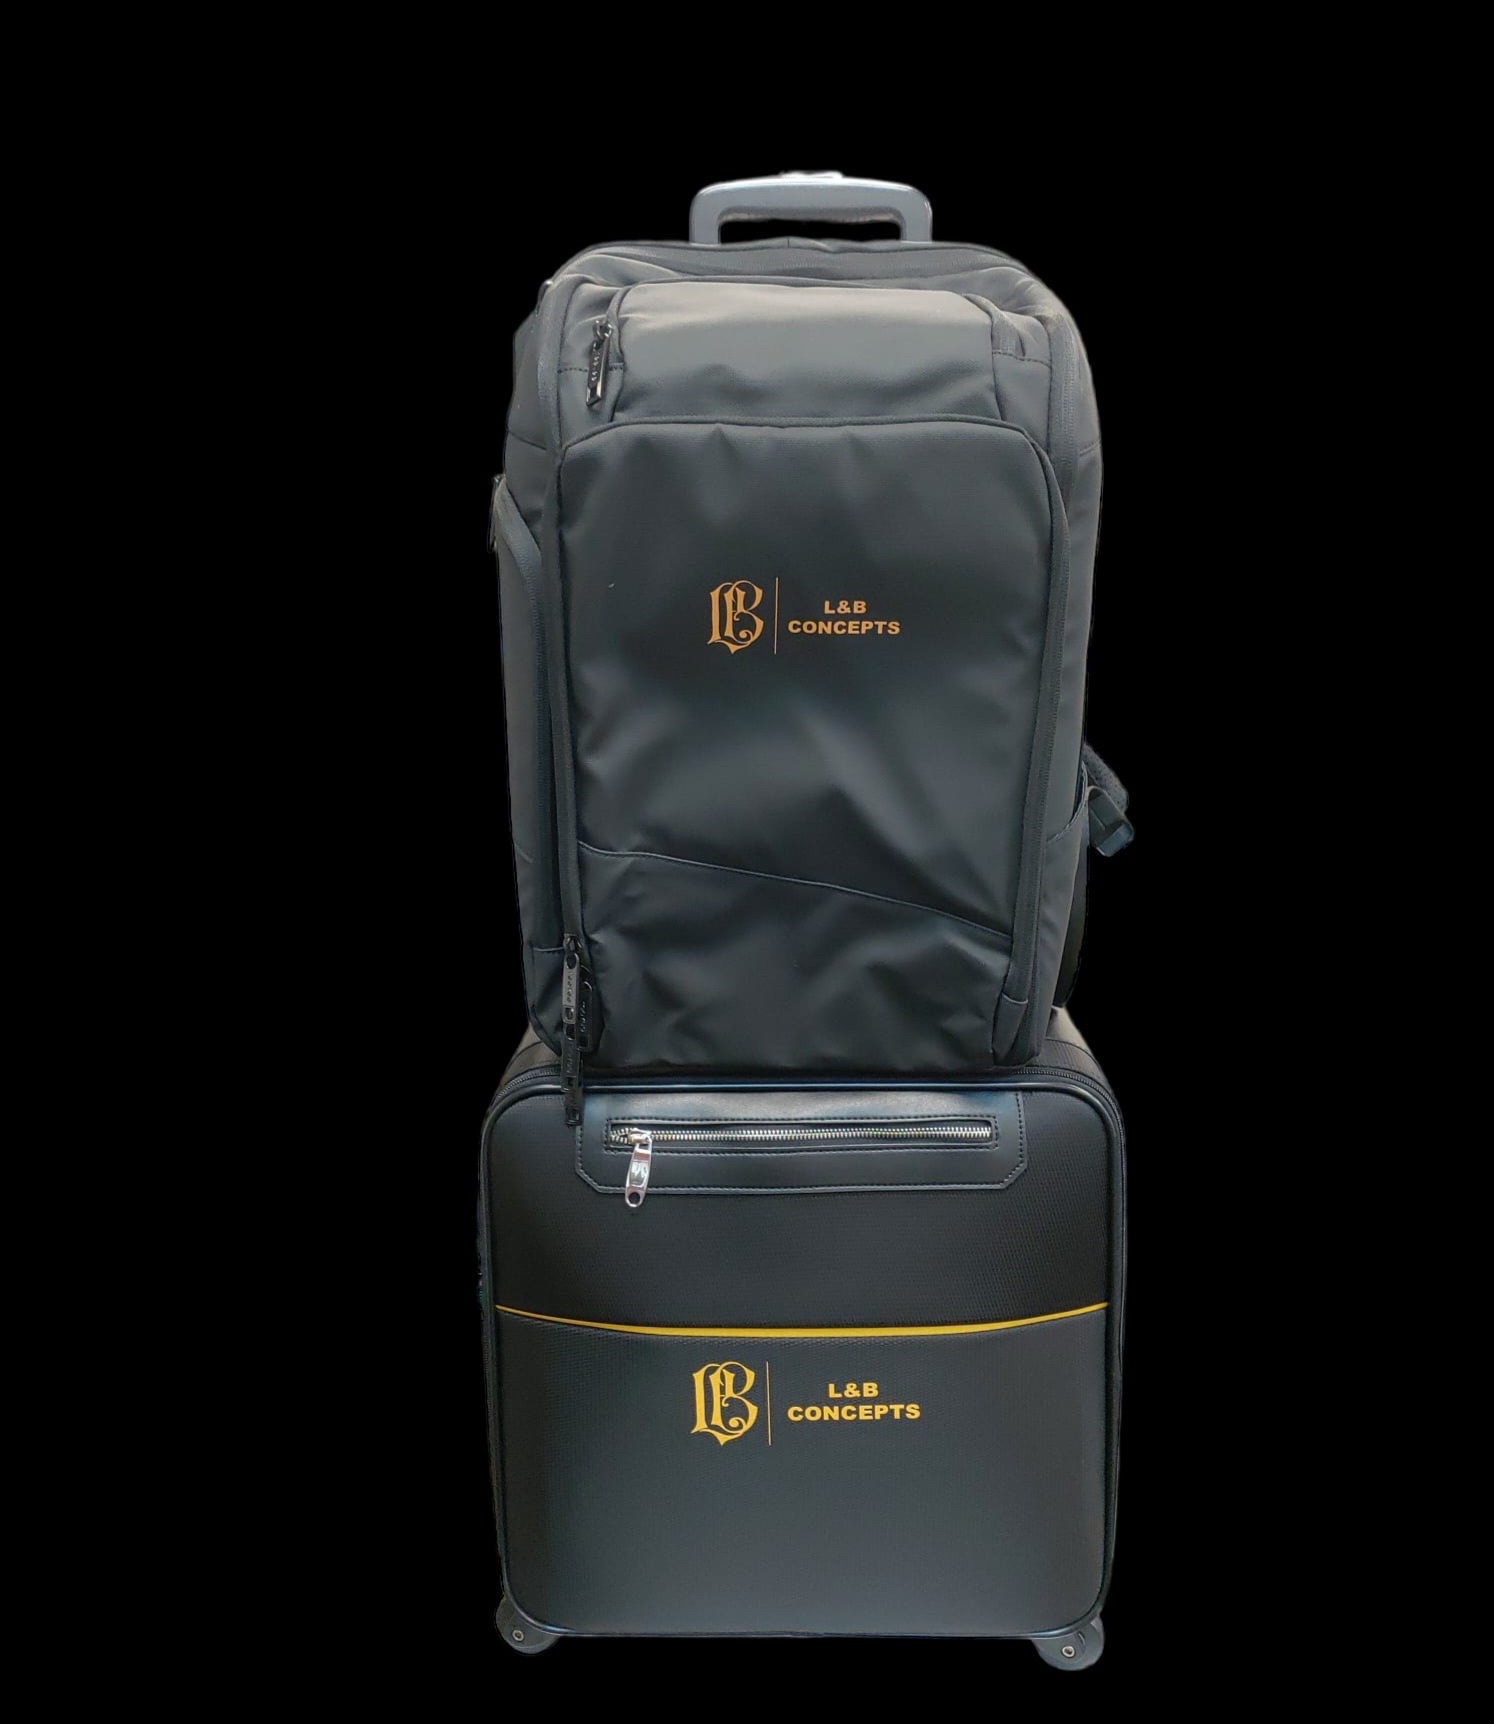 L and B luxury 18x18 inch carry on luggage. This was customized by us to be used for business or a quick weekend getaway. This four multi-directional bag is made out of woven polypropylene fabric